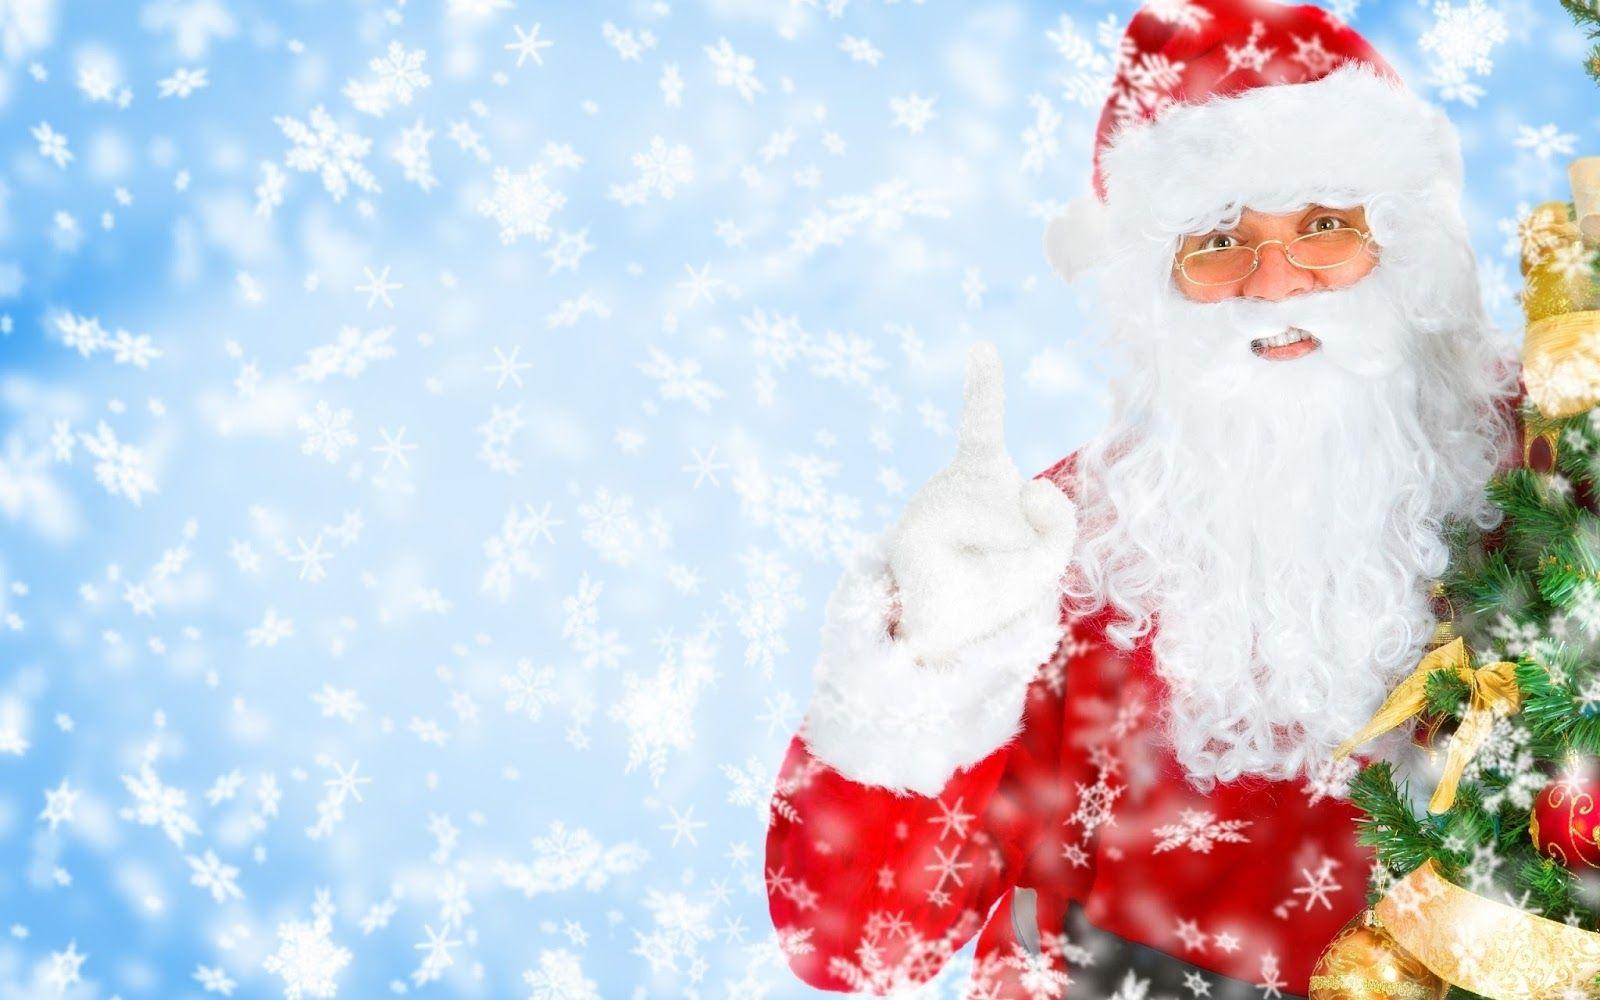 Free Download Merry Christmas Santa Claus Photo Image Picture